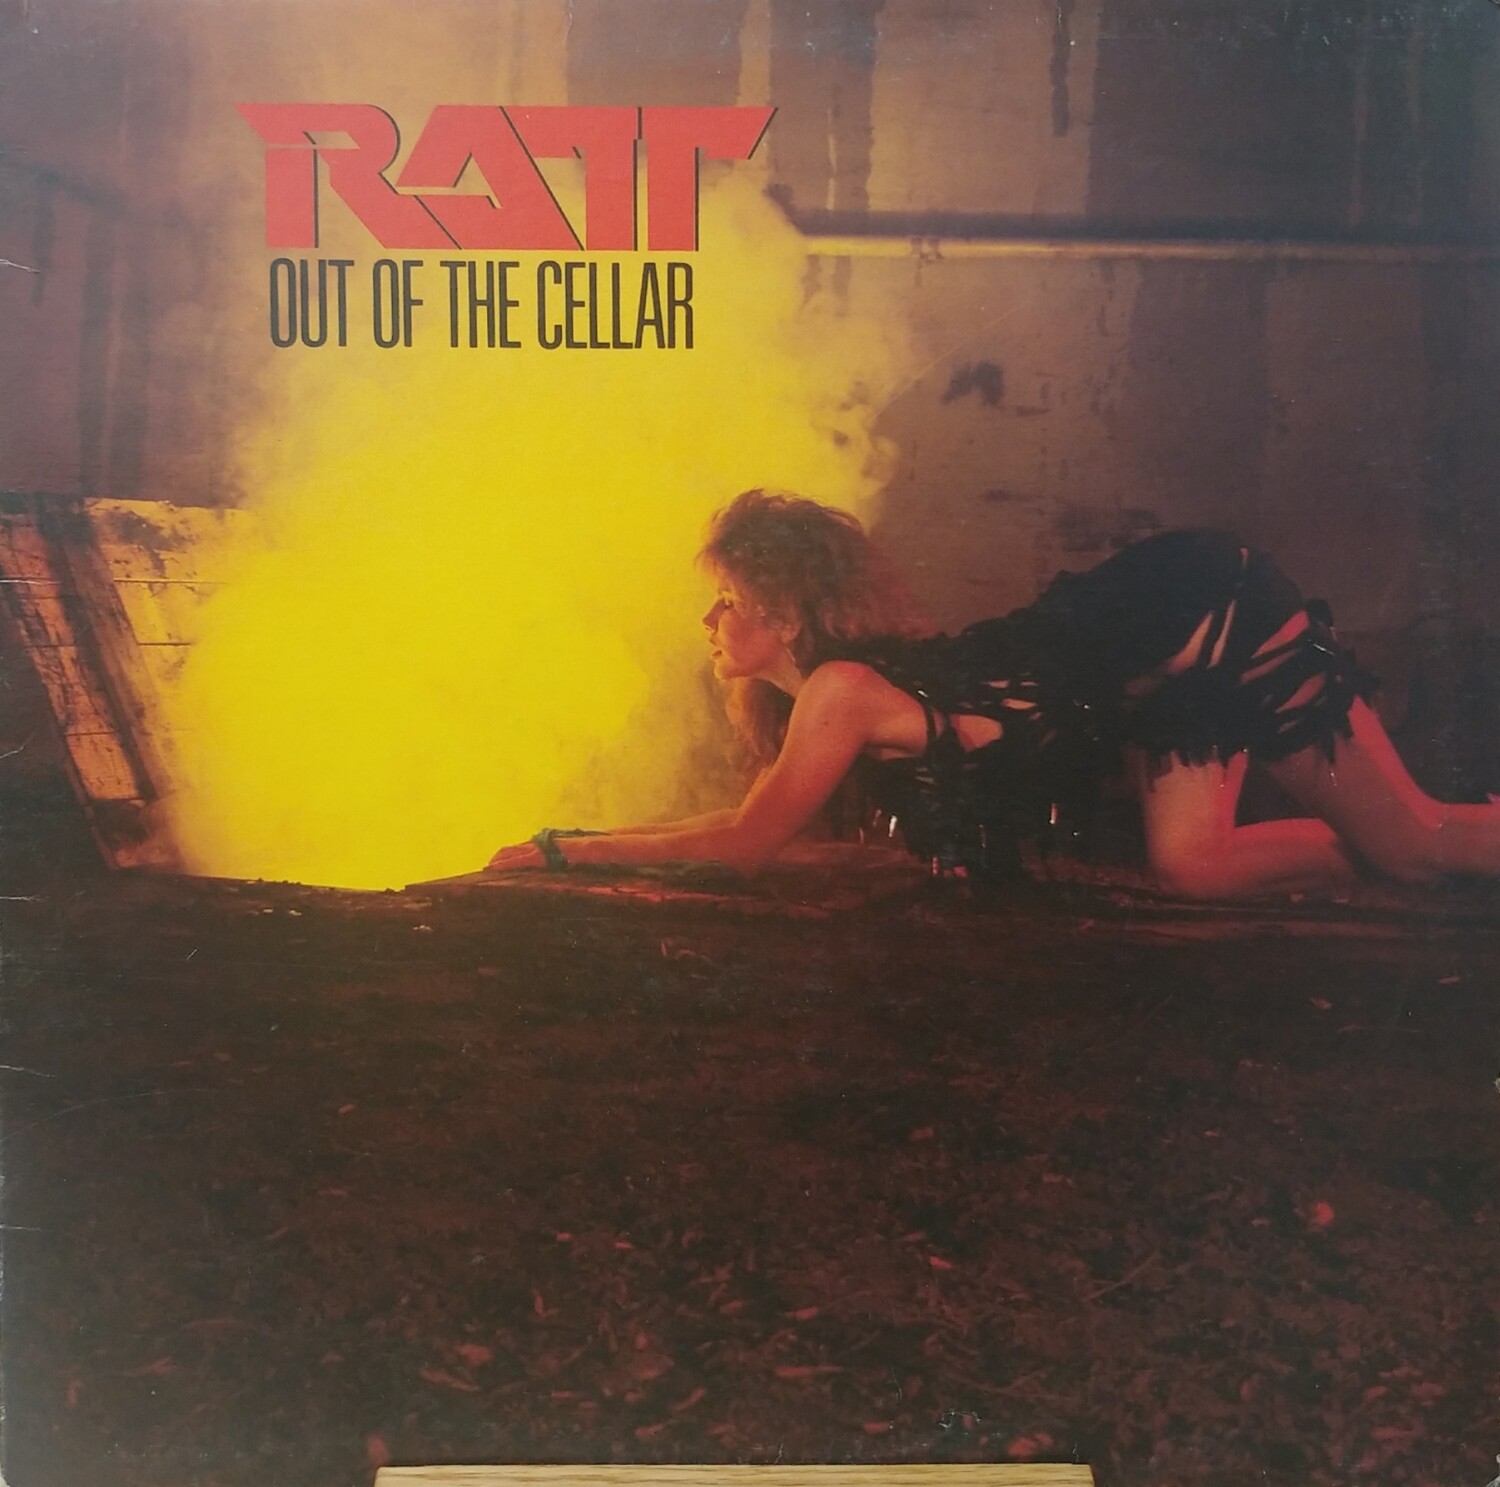 Ratt - Out of the cellar